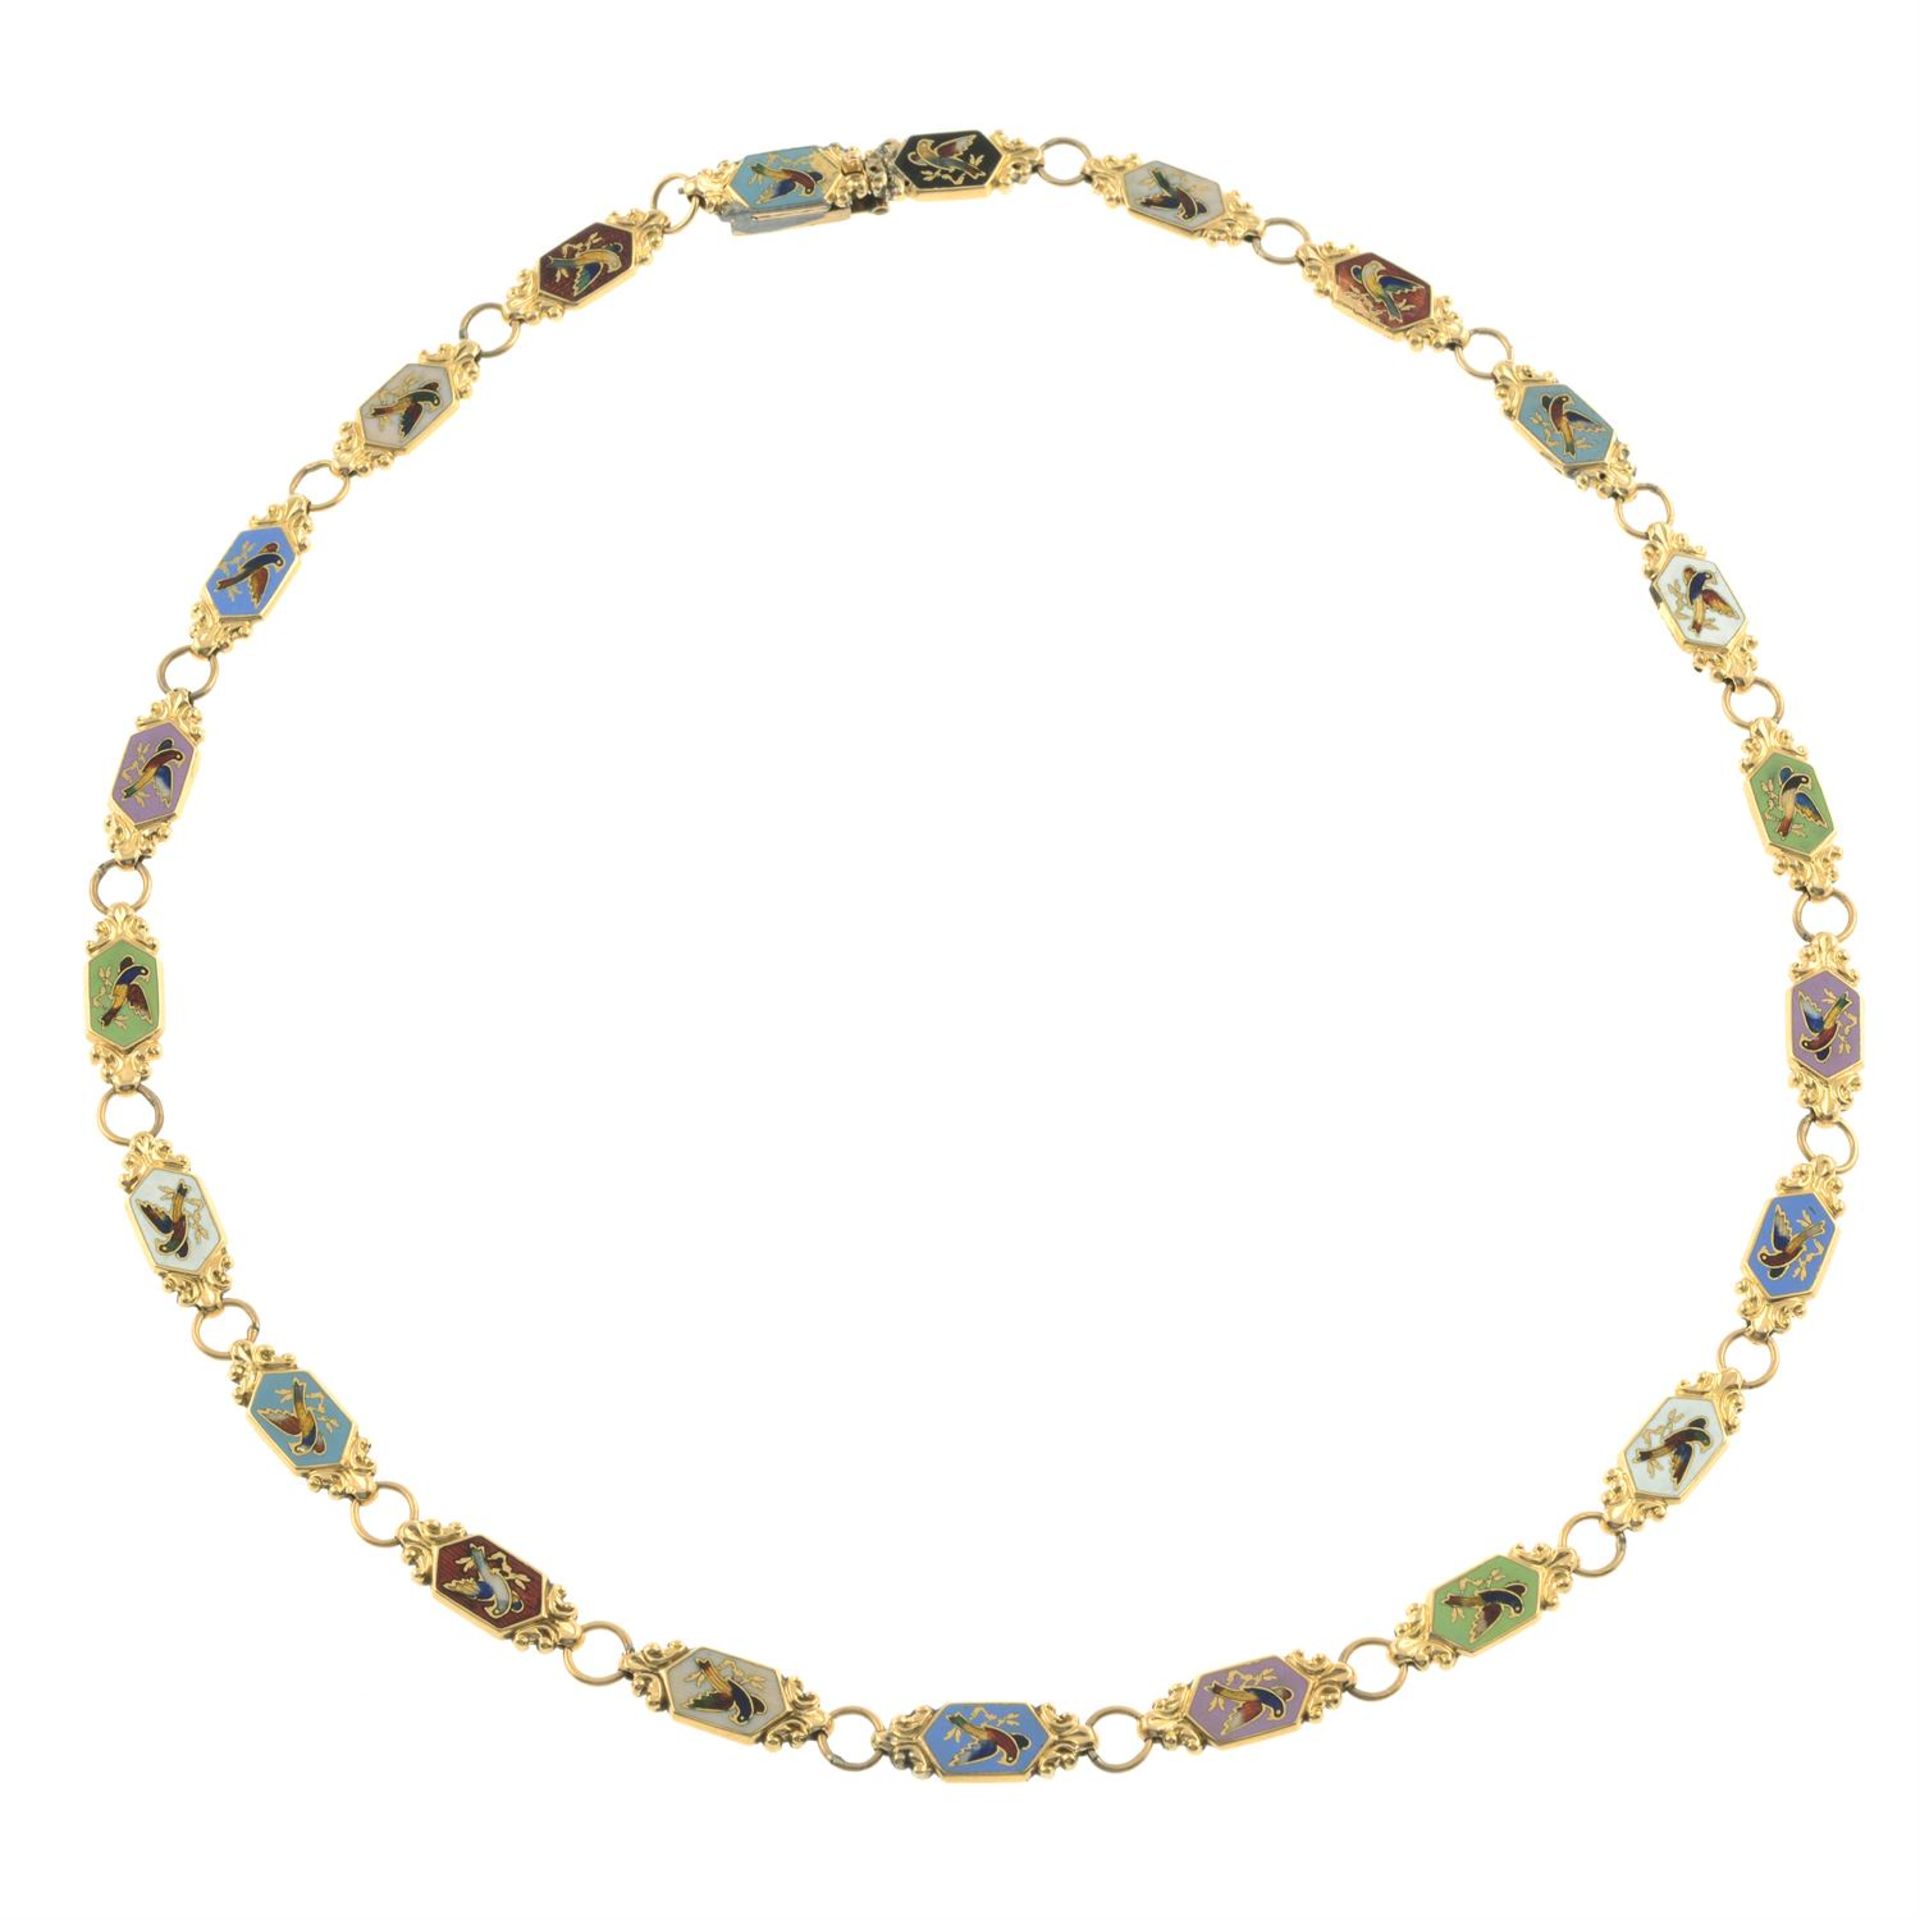 A mid 19th century gold and enamel bird motif necklace. - Image 2 of 4